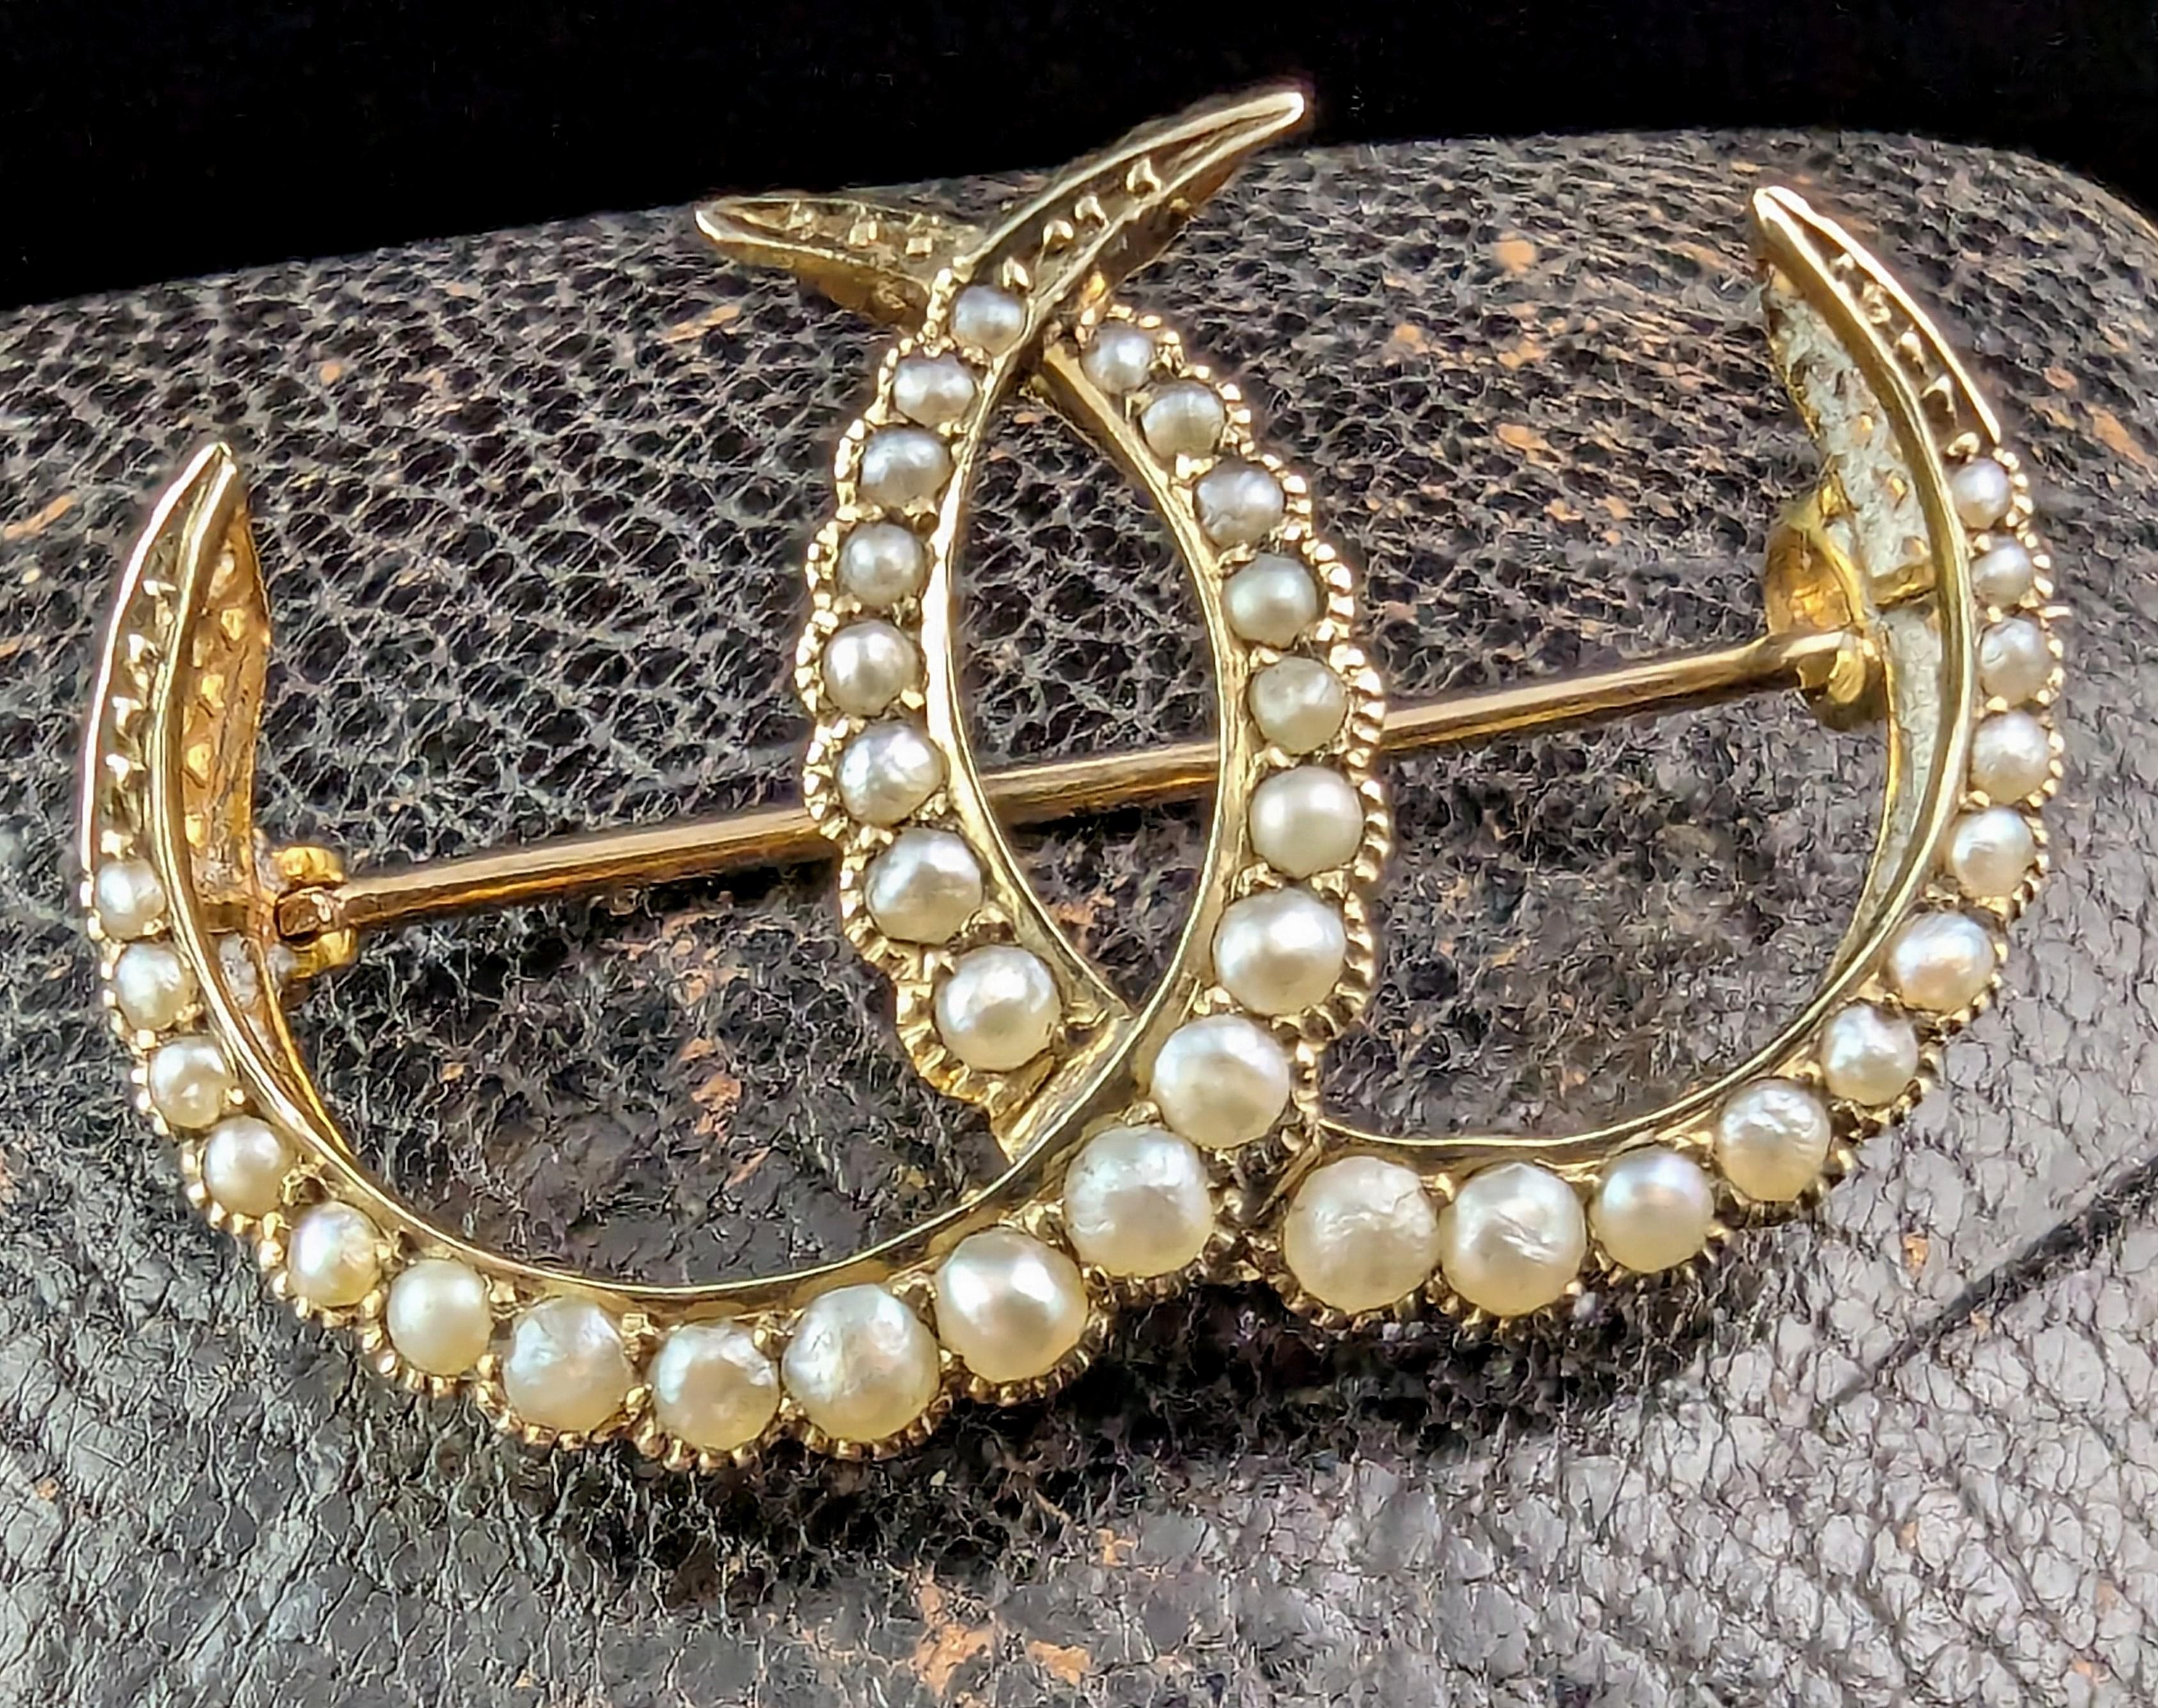 Antique 9k gold and Pearl Double Crescent Moon brooch, Murrle Bennett  For Sale 5